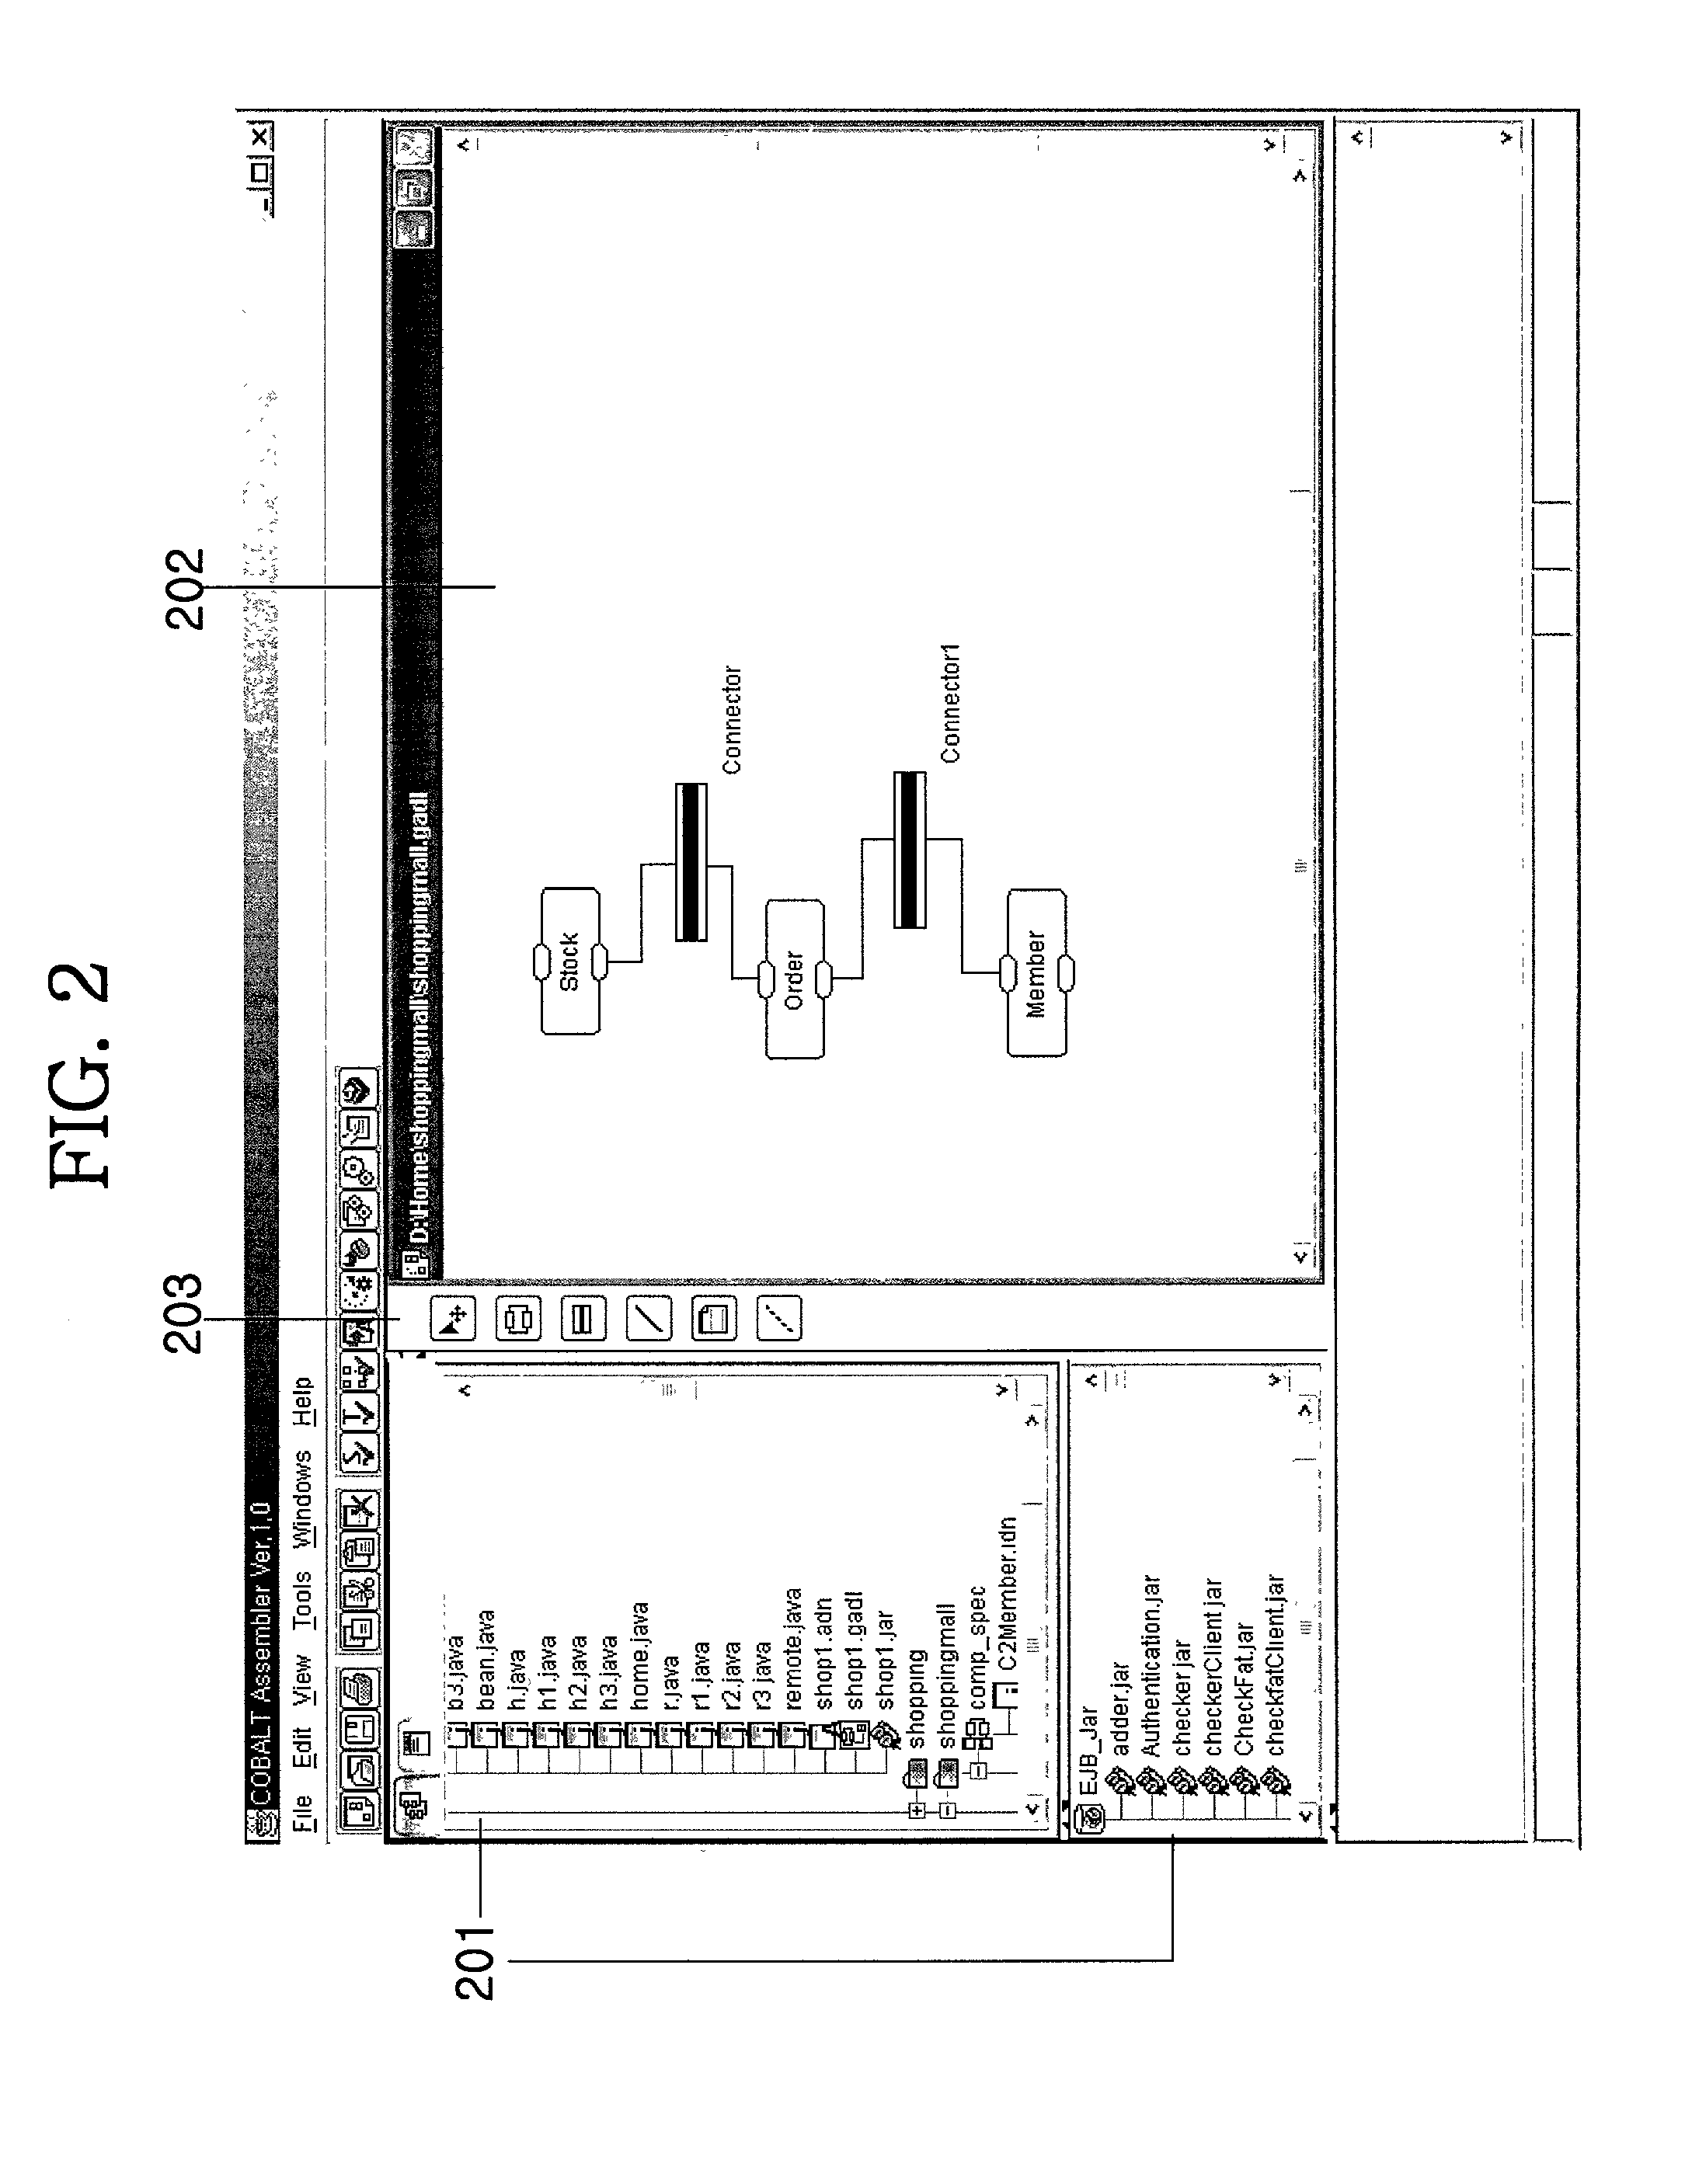 Method and apparatus for assembling Enterprise JavaBeans components